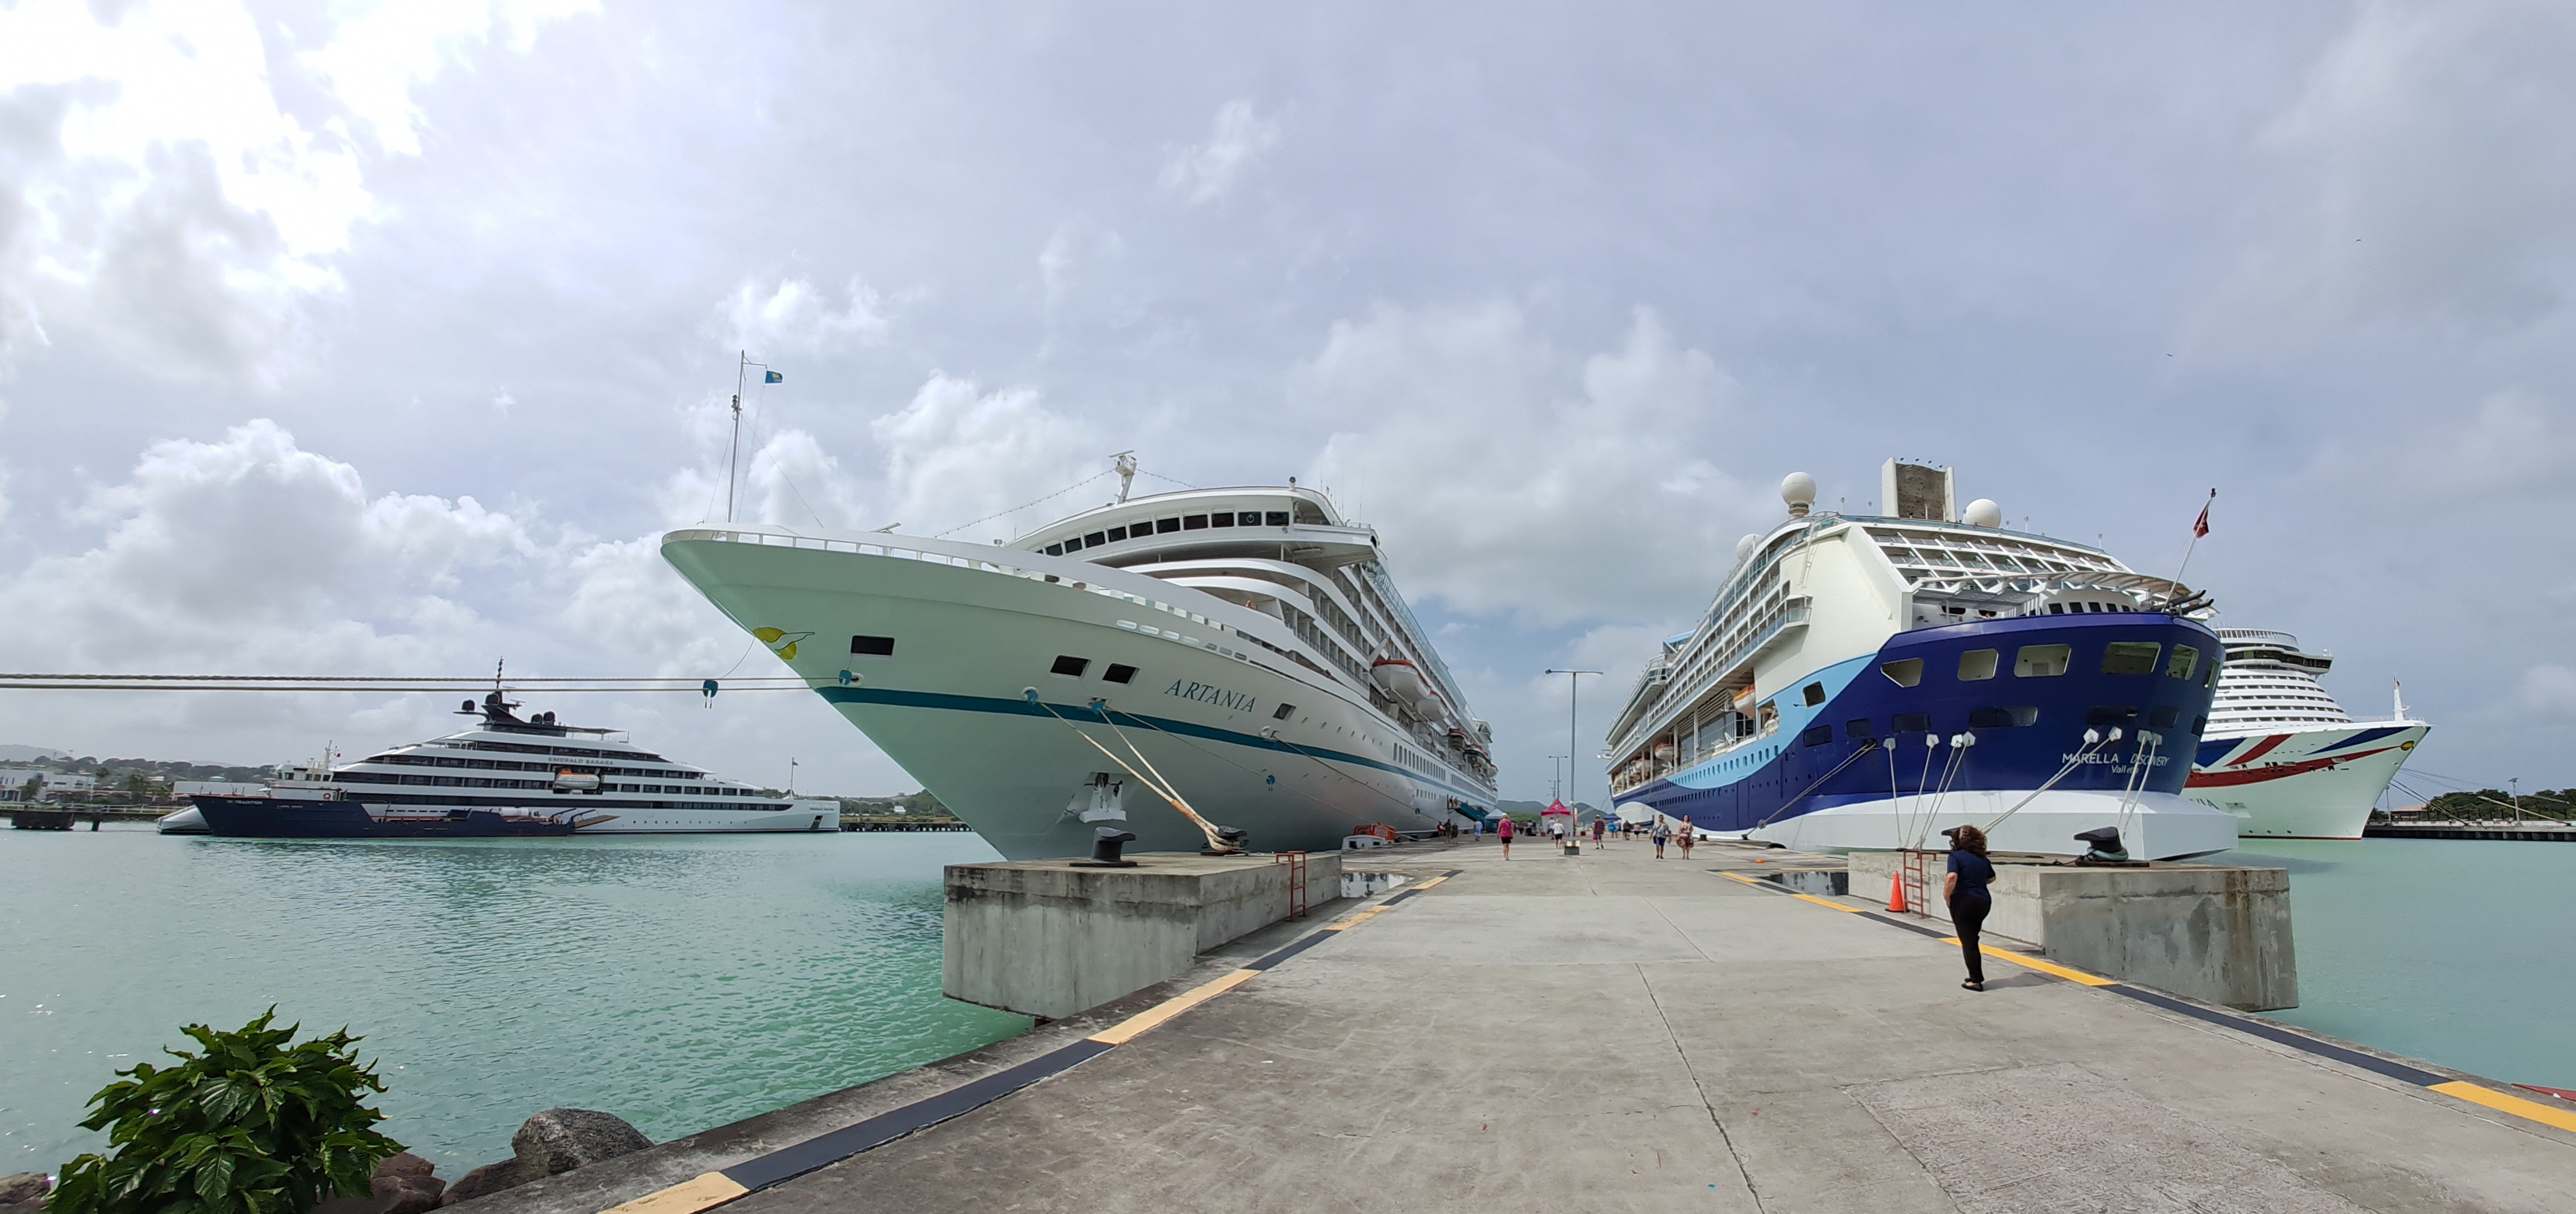 Antigua Cruise Port conducts Simultaneous Homeporting Operations